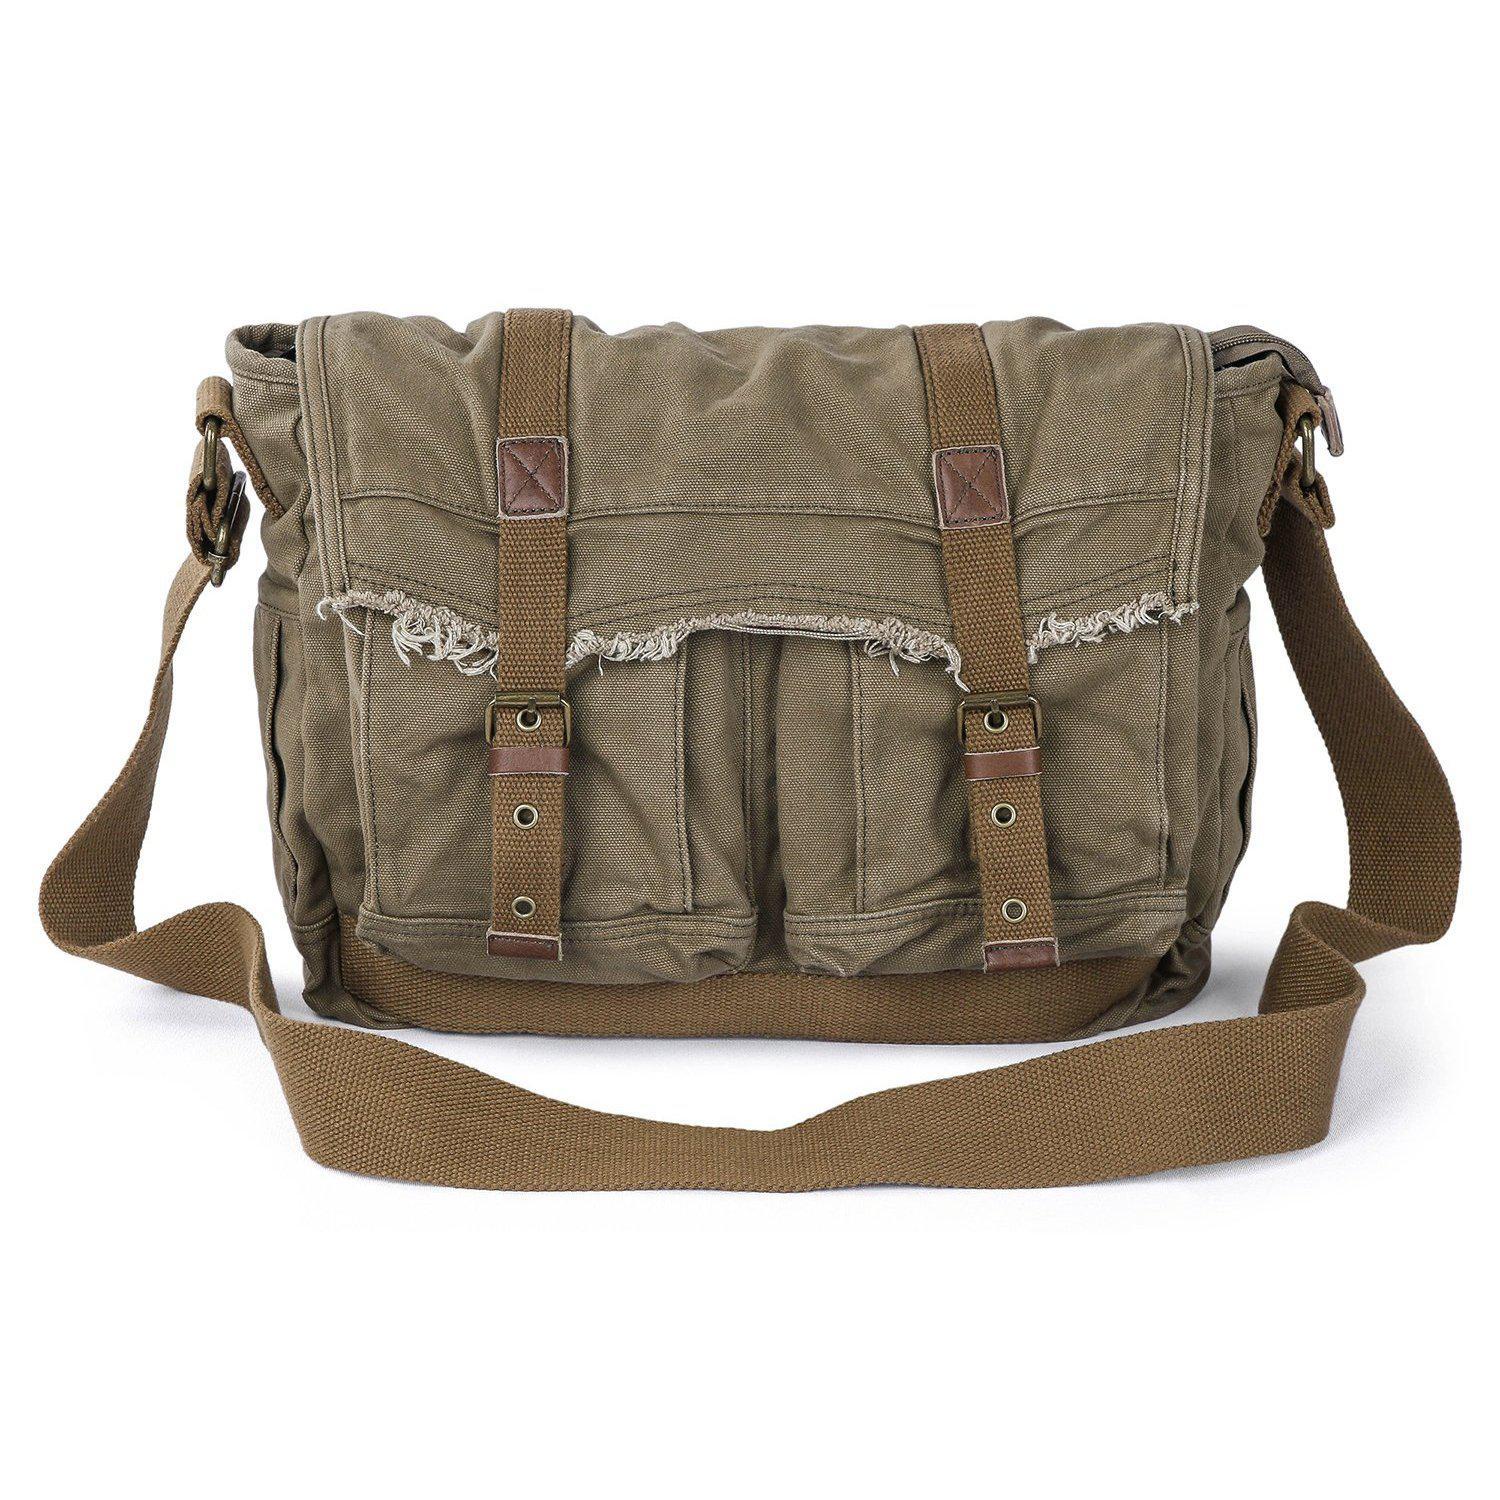 Buy Rothco Deluxe Vintage Canvas Messenger Bag - 15 Liter | Money Back  Guarantee | ARMY STAR